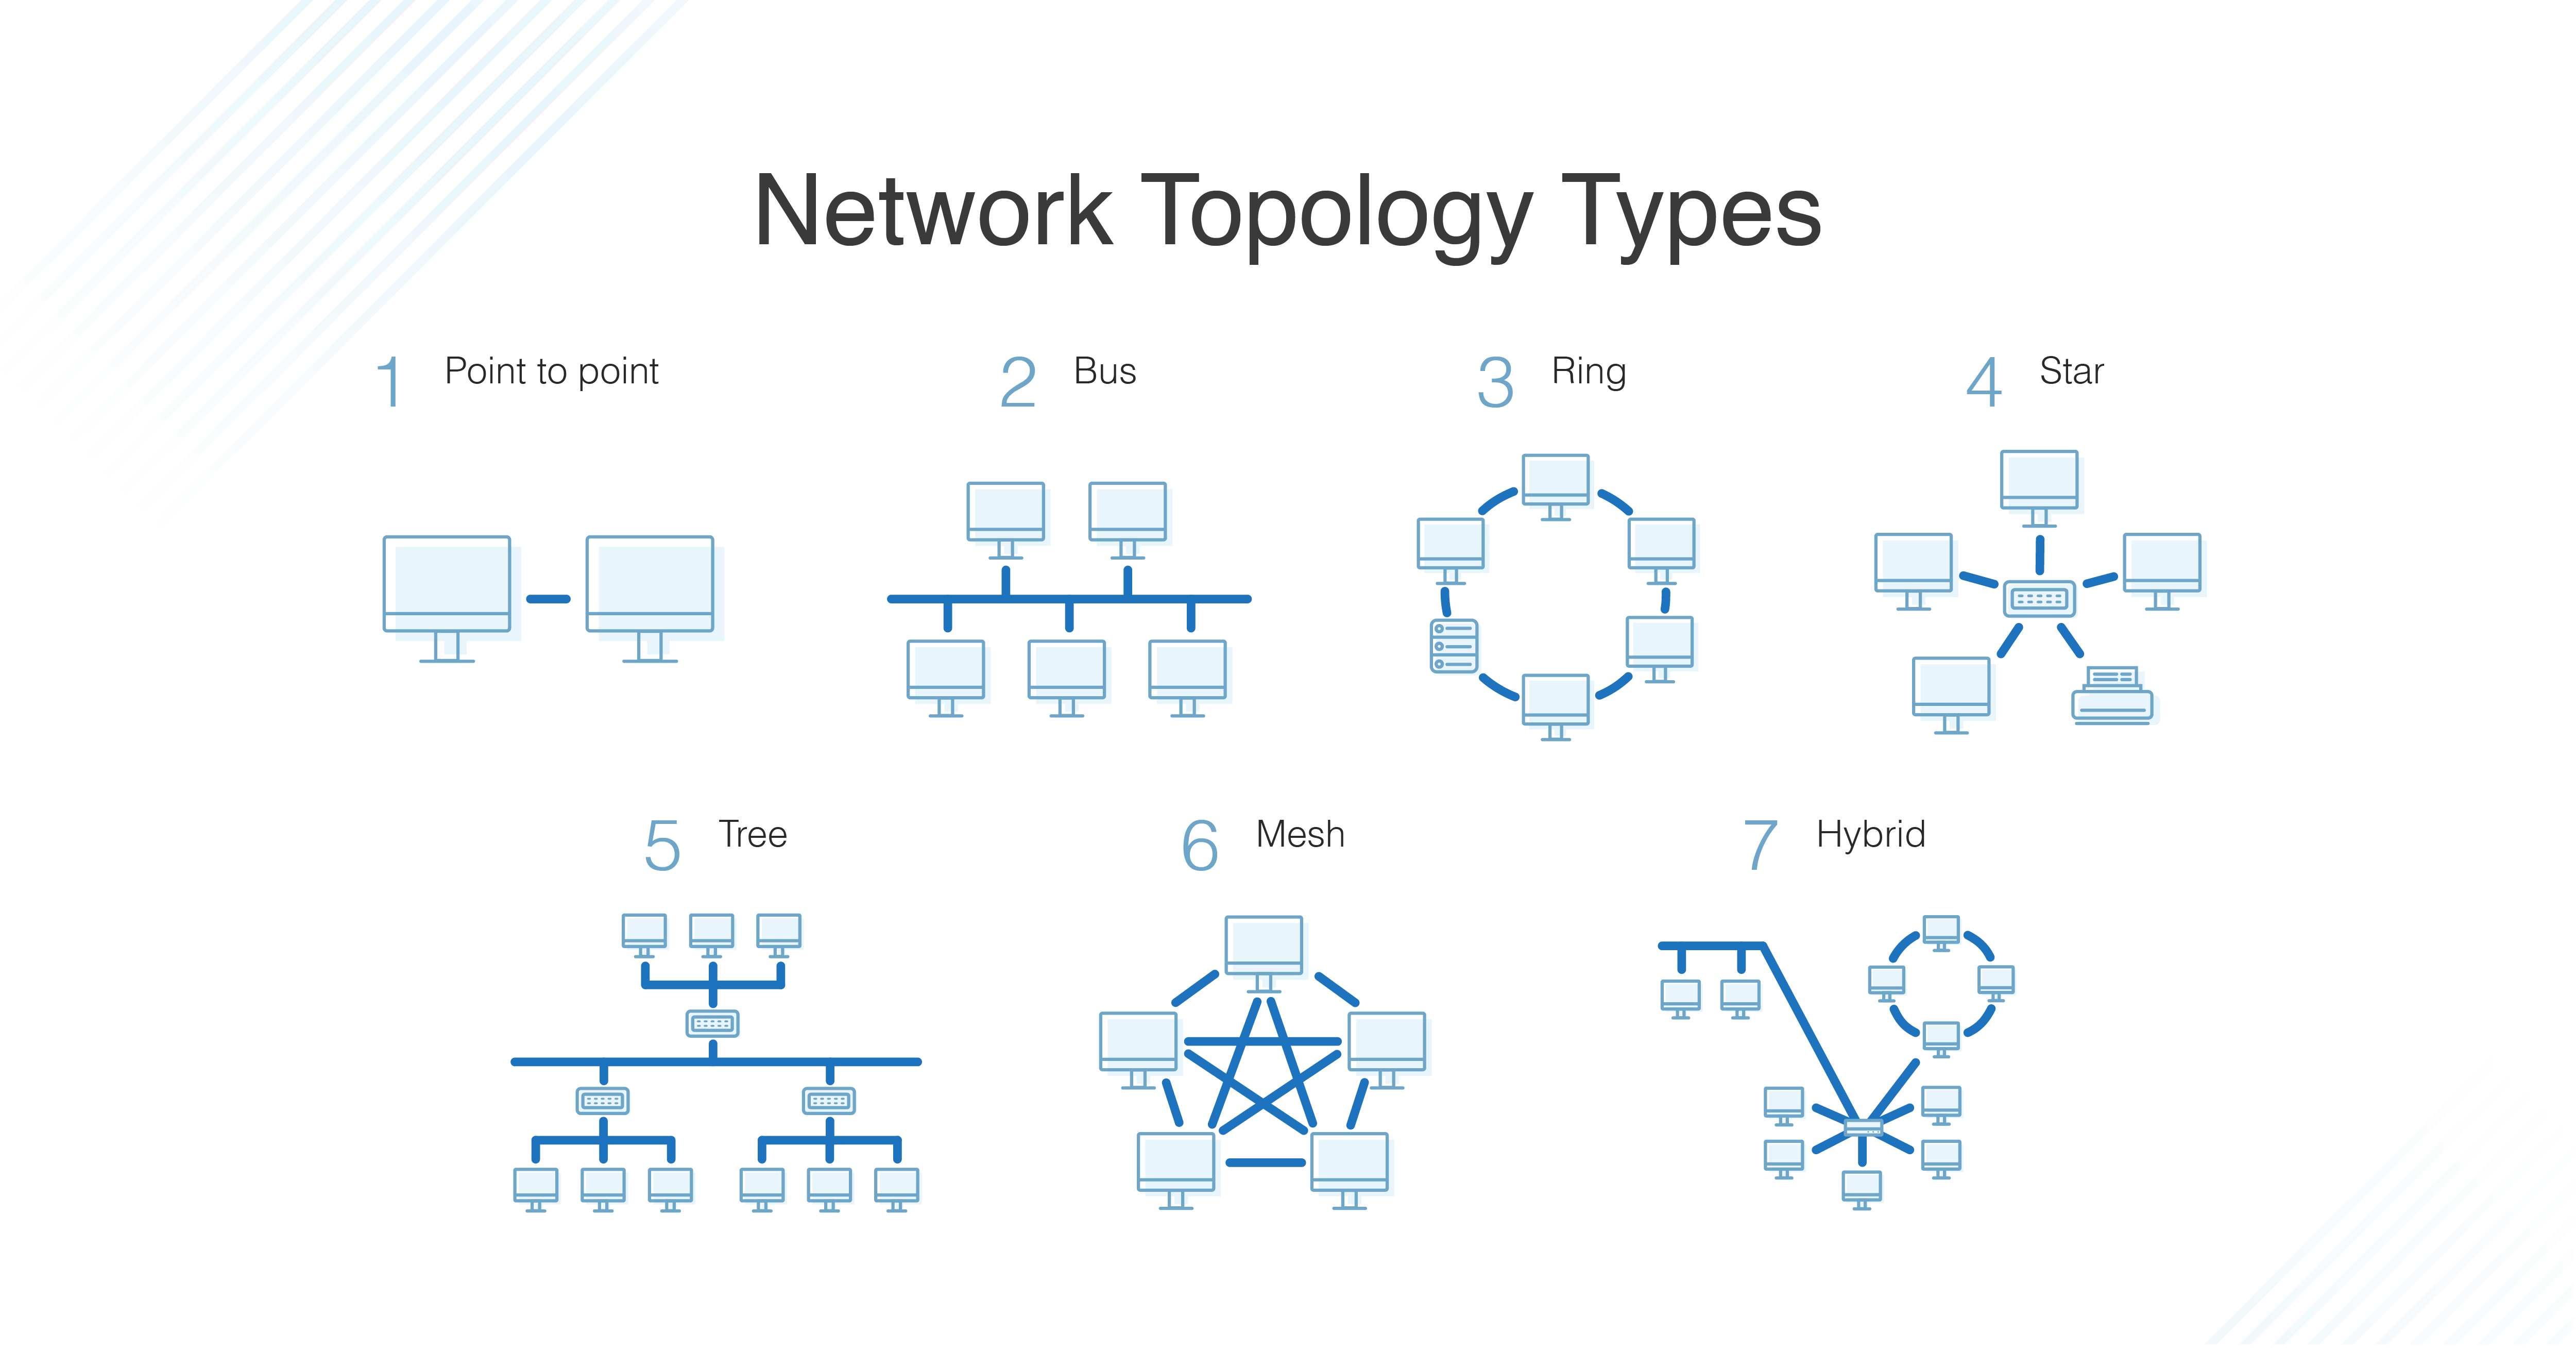 Demystifying Network Topologies: From Bus to Mesh